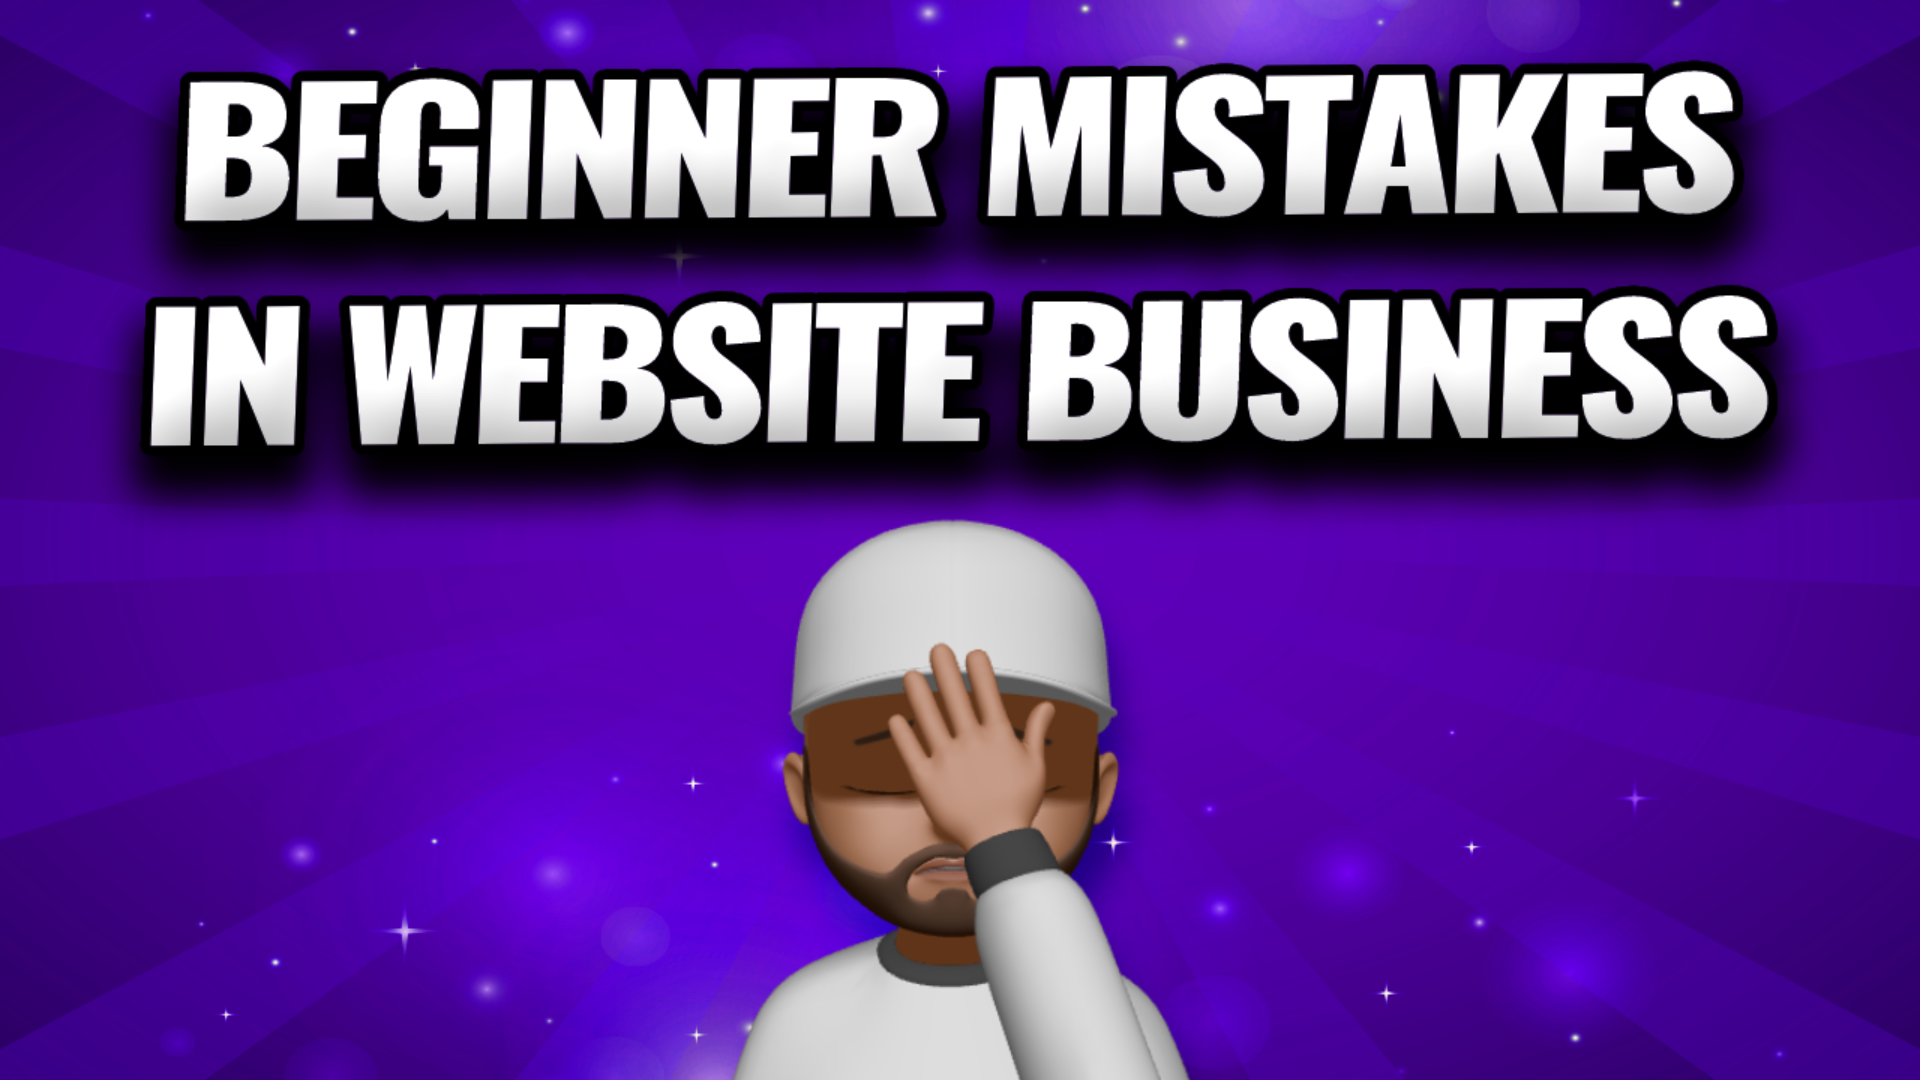 "Beginner mistakes in website business" with me face palm